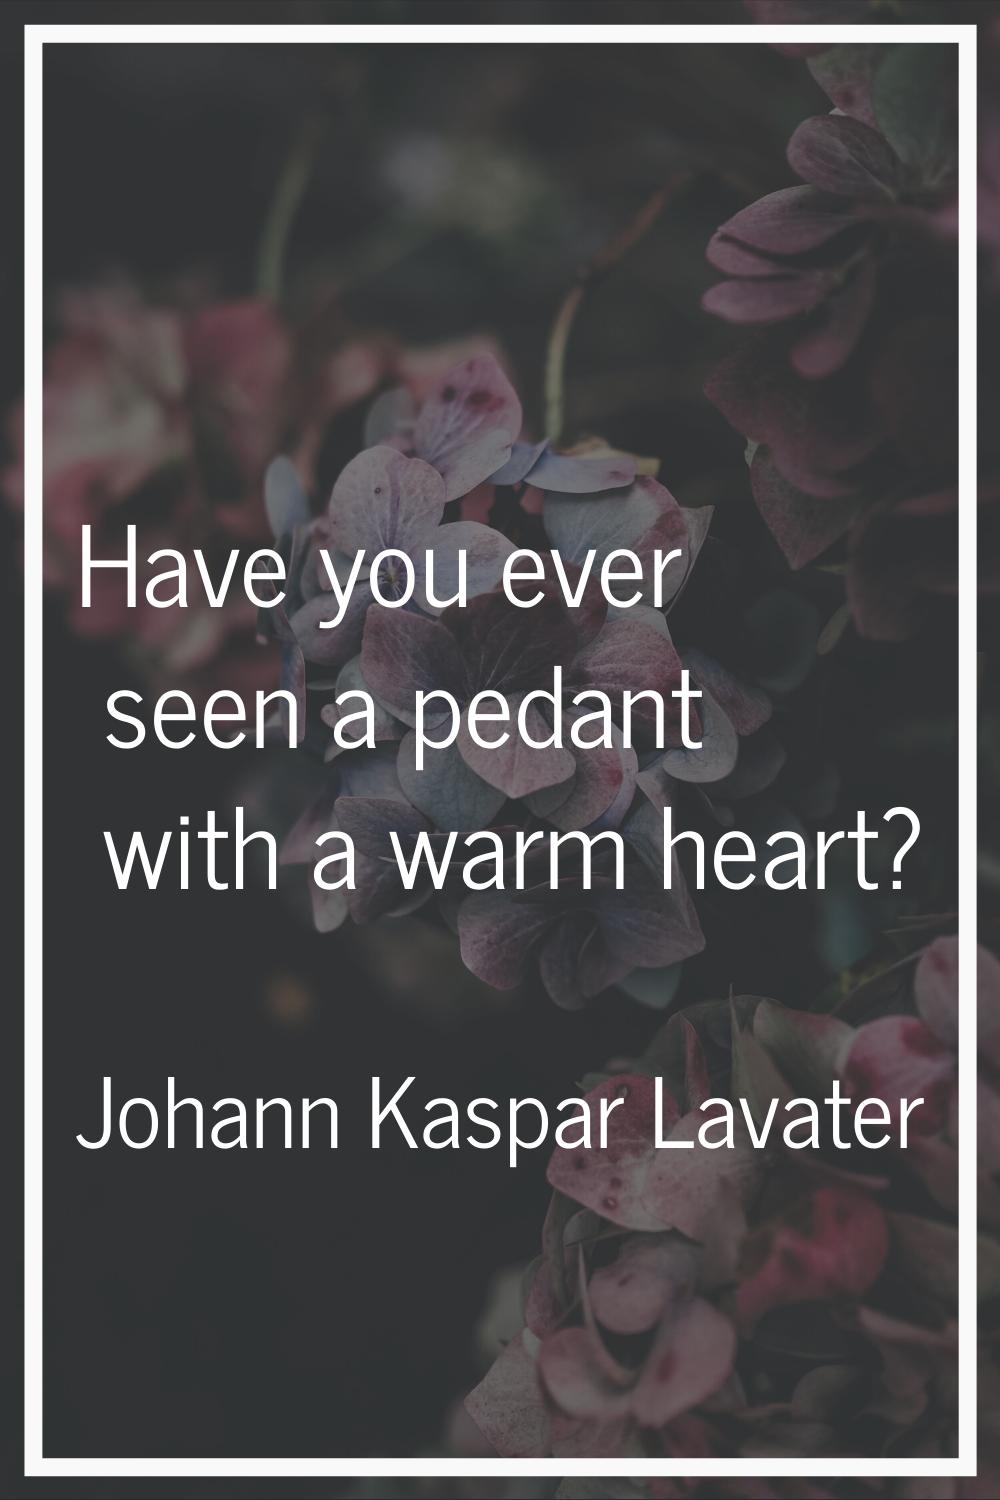 Have you ever seen a pedant with a warm heart?